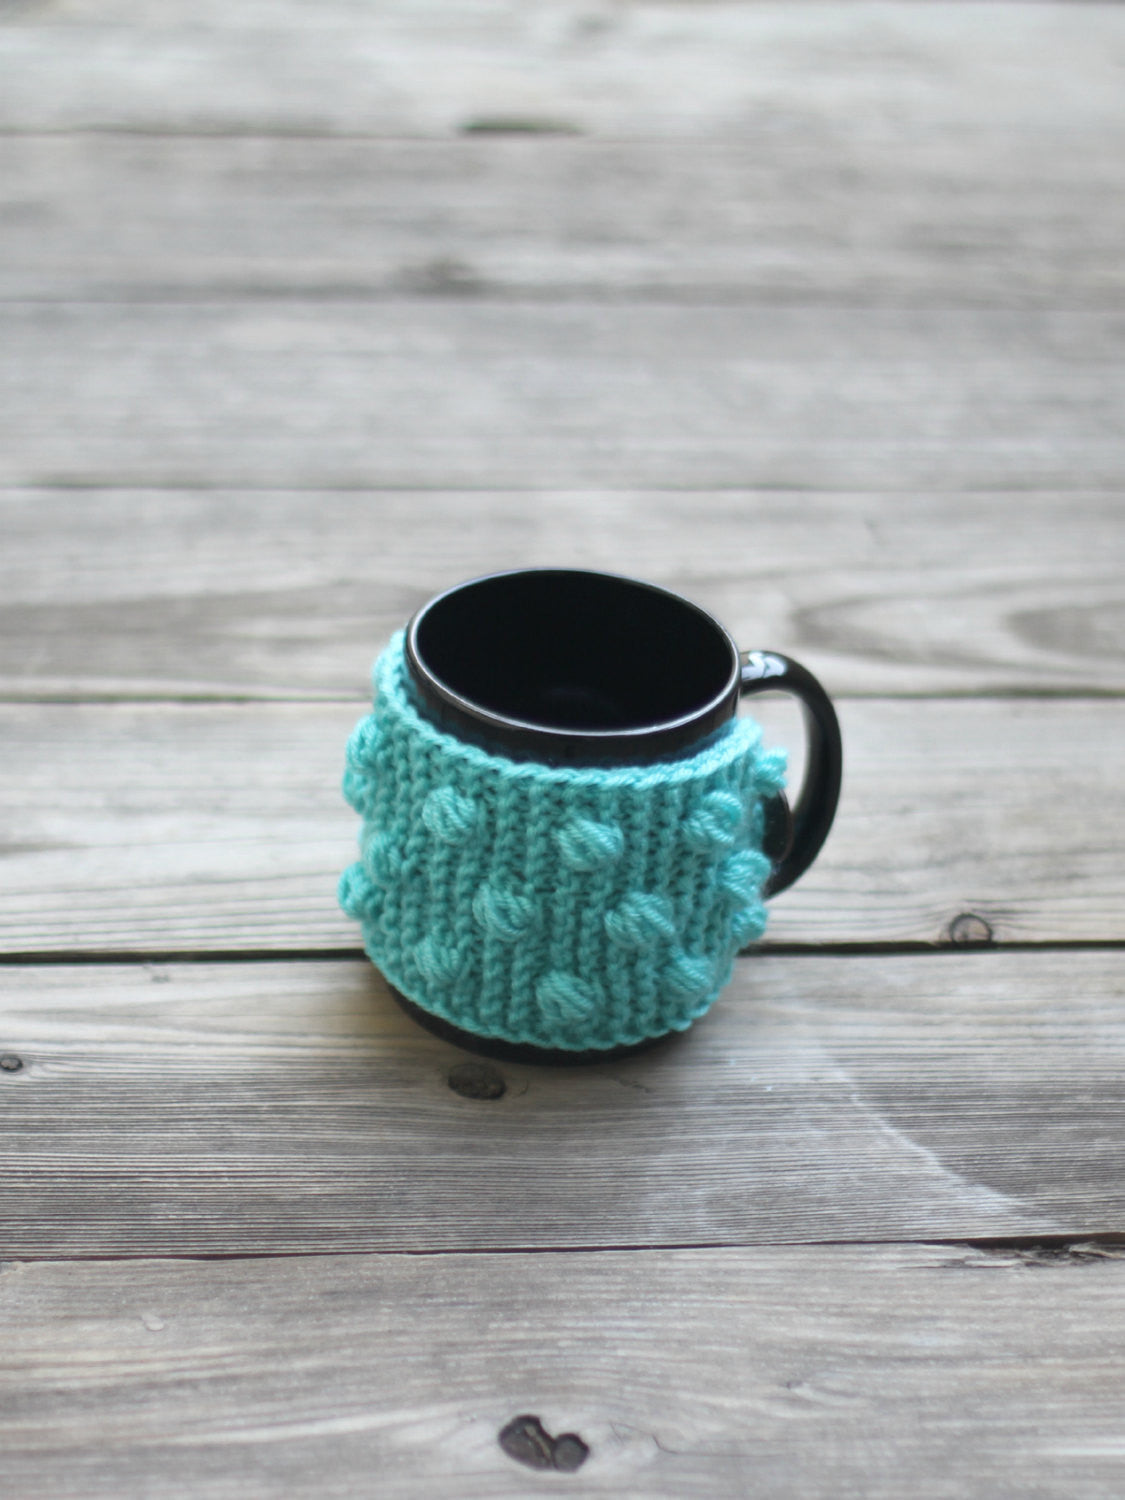 Knit pattern mug cozy with nupps, cup cozy, bobbles cup cozy DIY knitted tutorial, knitted pattern